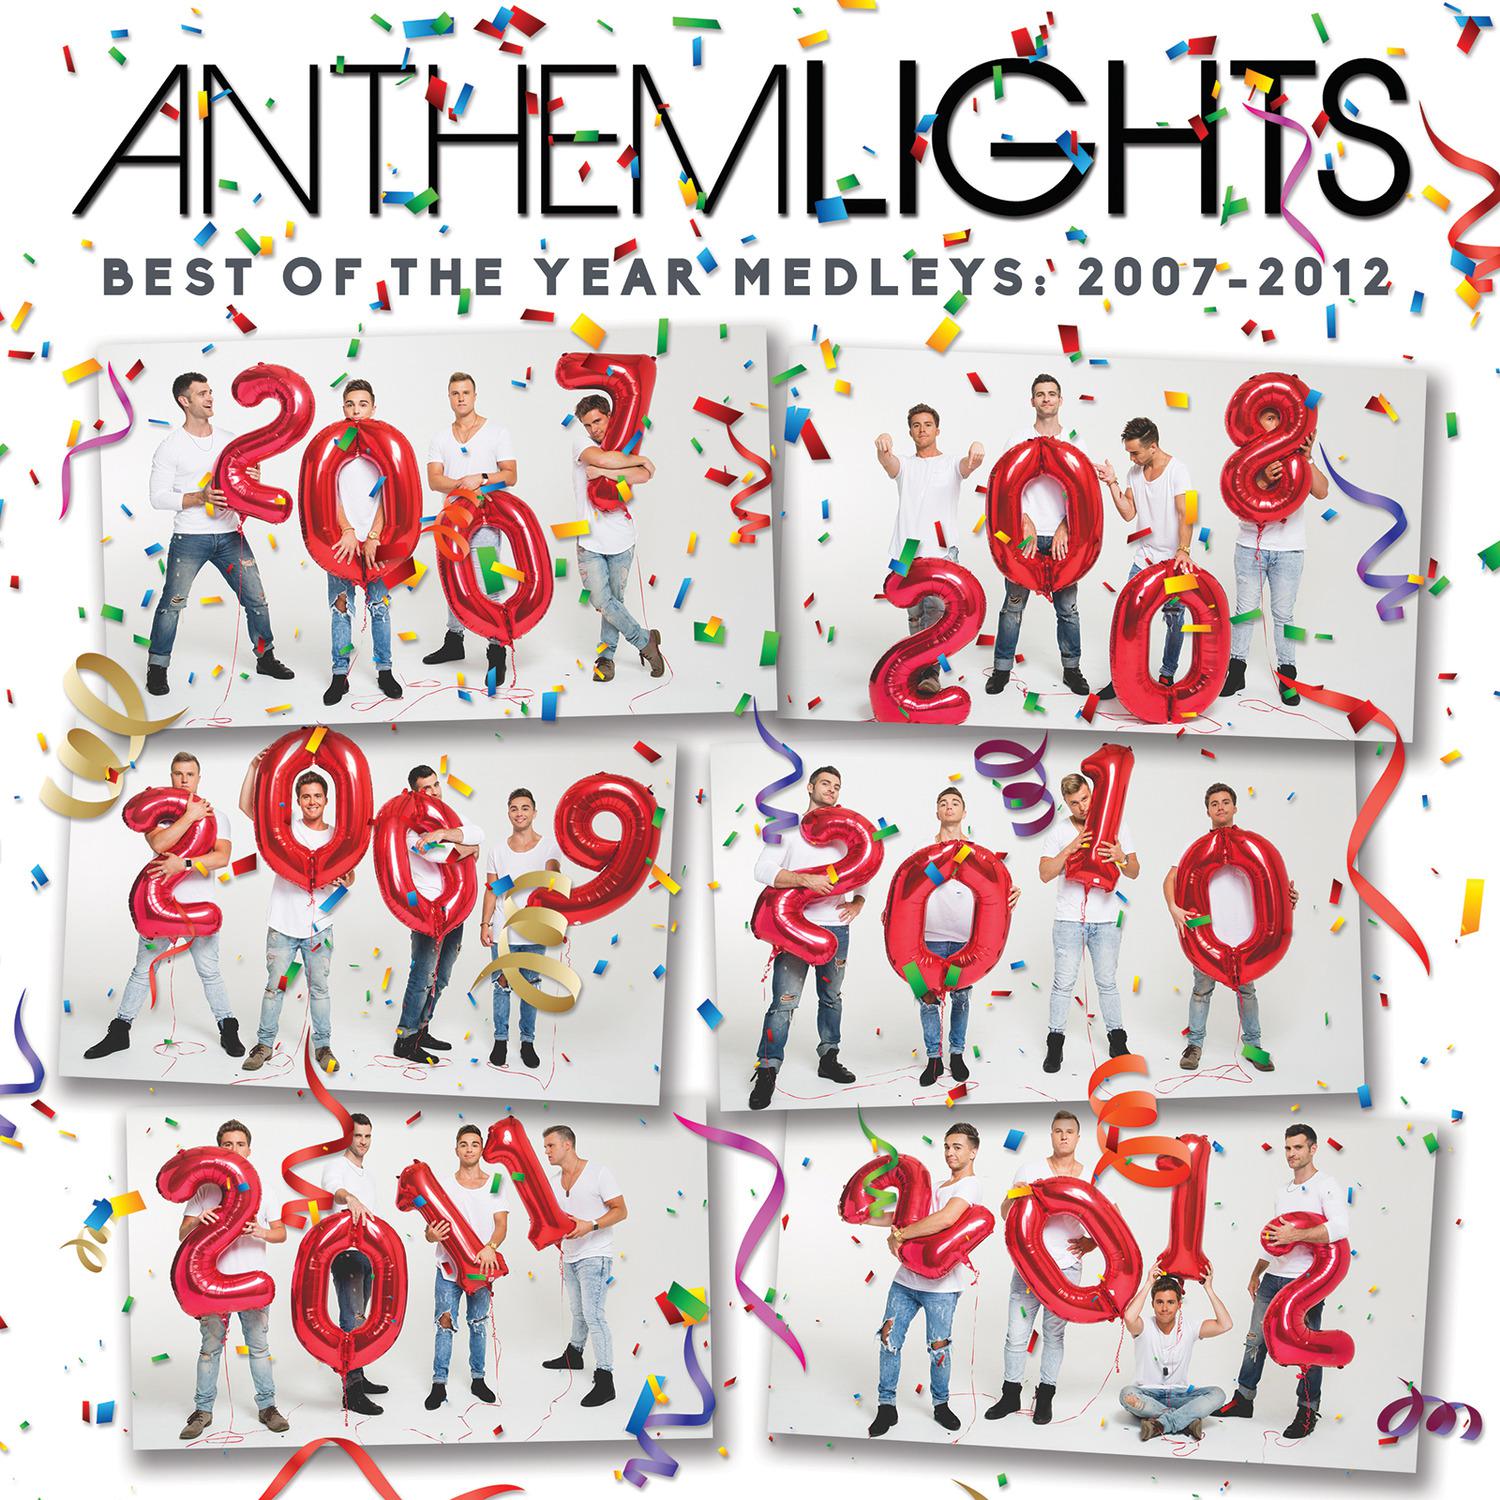 Best of 2009: Whatcha’ Say / Use Somebody / Halo / I'm Yours / Just Dance / I Gotta Feeling歌词 歌手Anthem Lights-专辑Best of the Year Medleys: 2007 - 2012-单曲《Best of 2009: Whatcha’ Say / Use Somebody / Halo / I'm Yours / Just Dance / I Gotta Feeling》LRC歌词下载